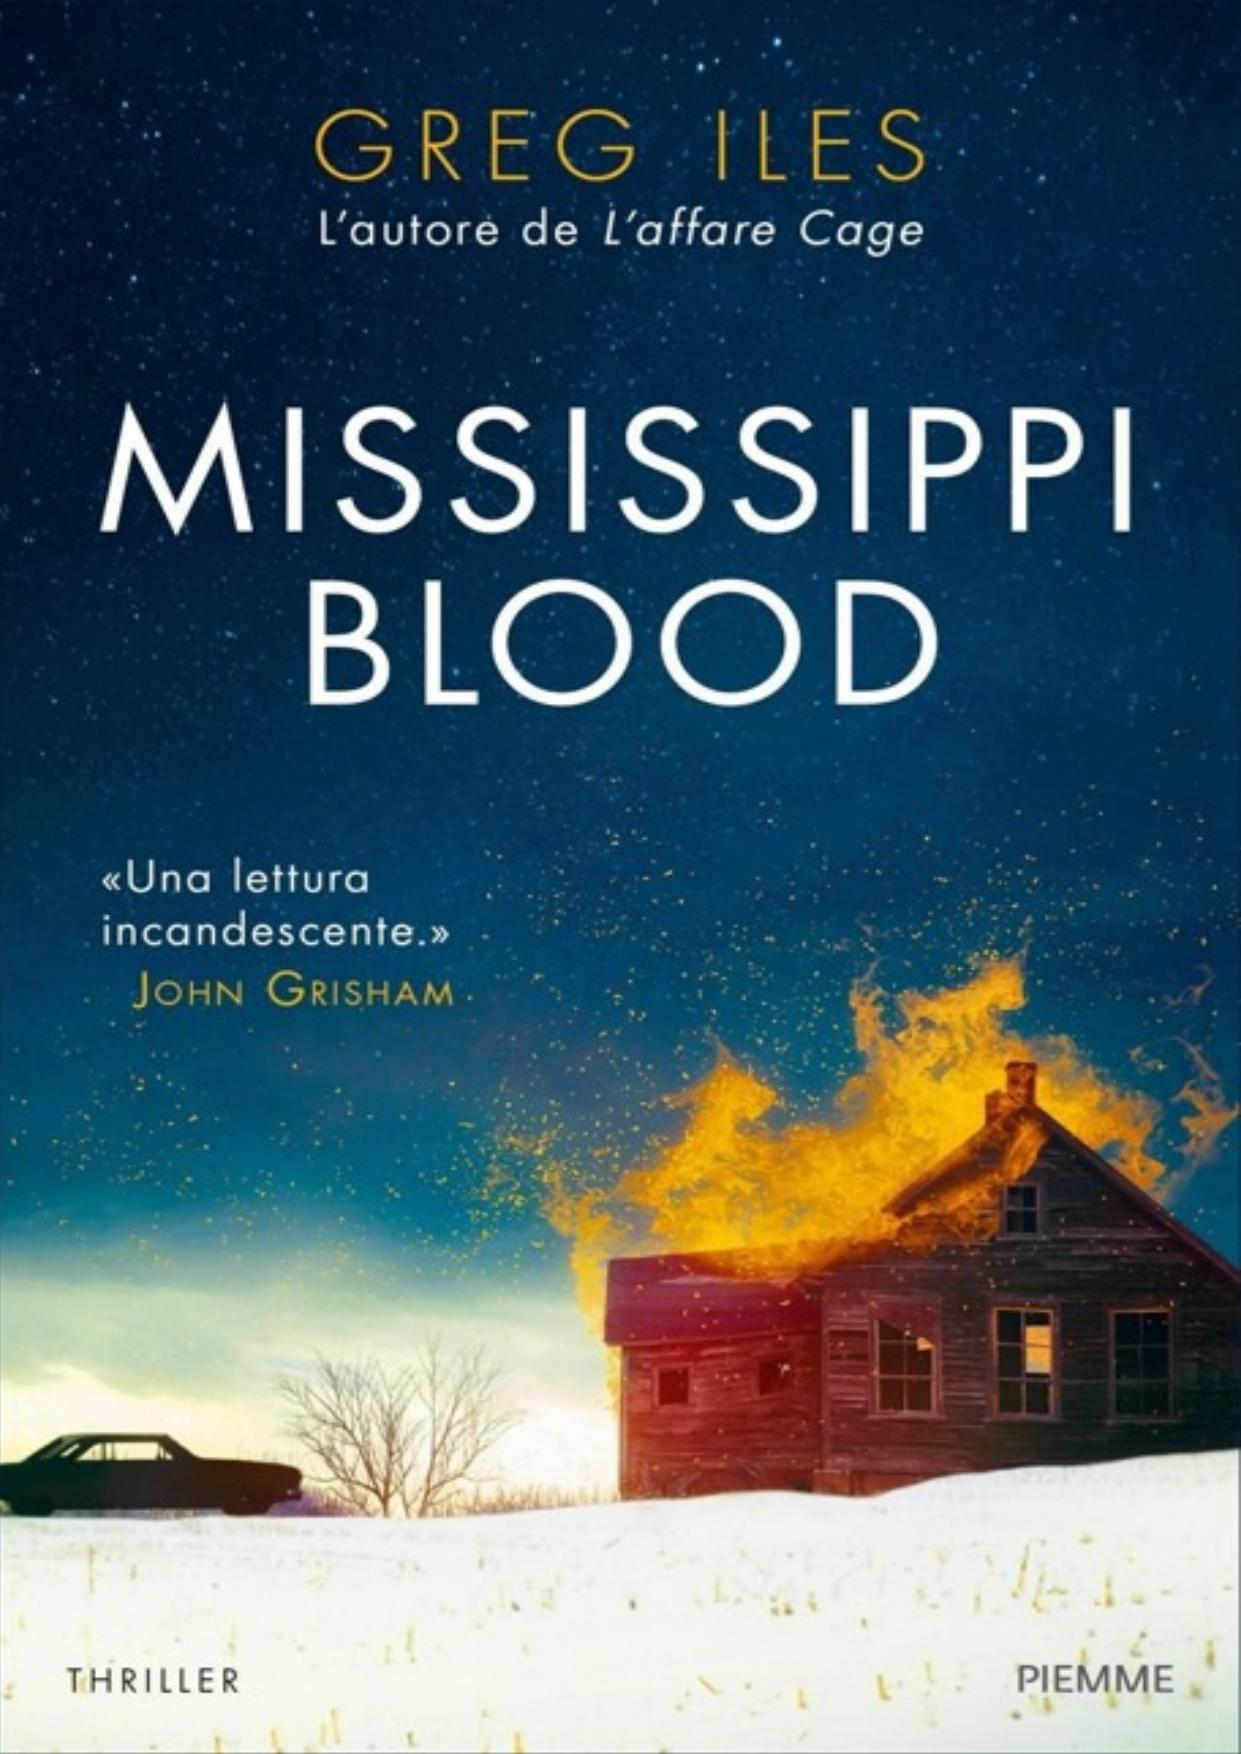 Mississippi blood by Greg Iles